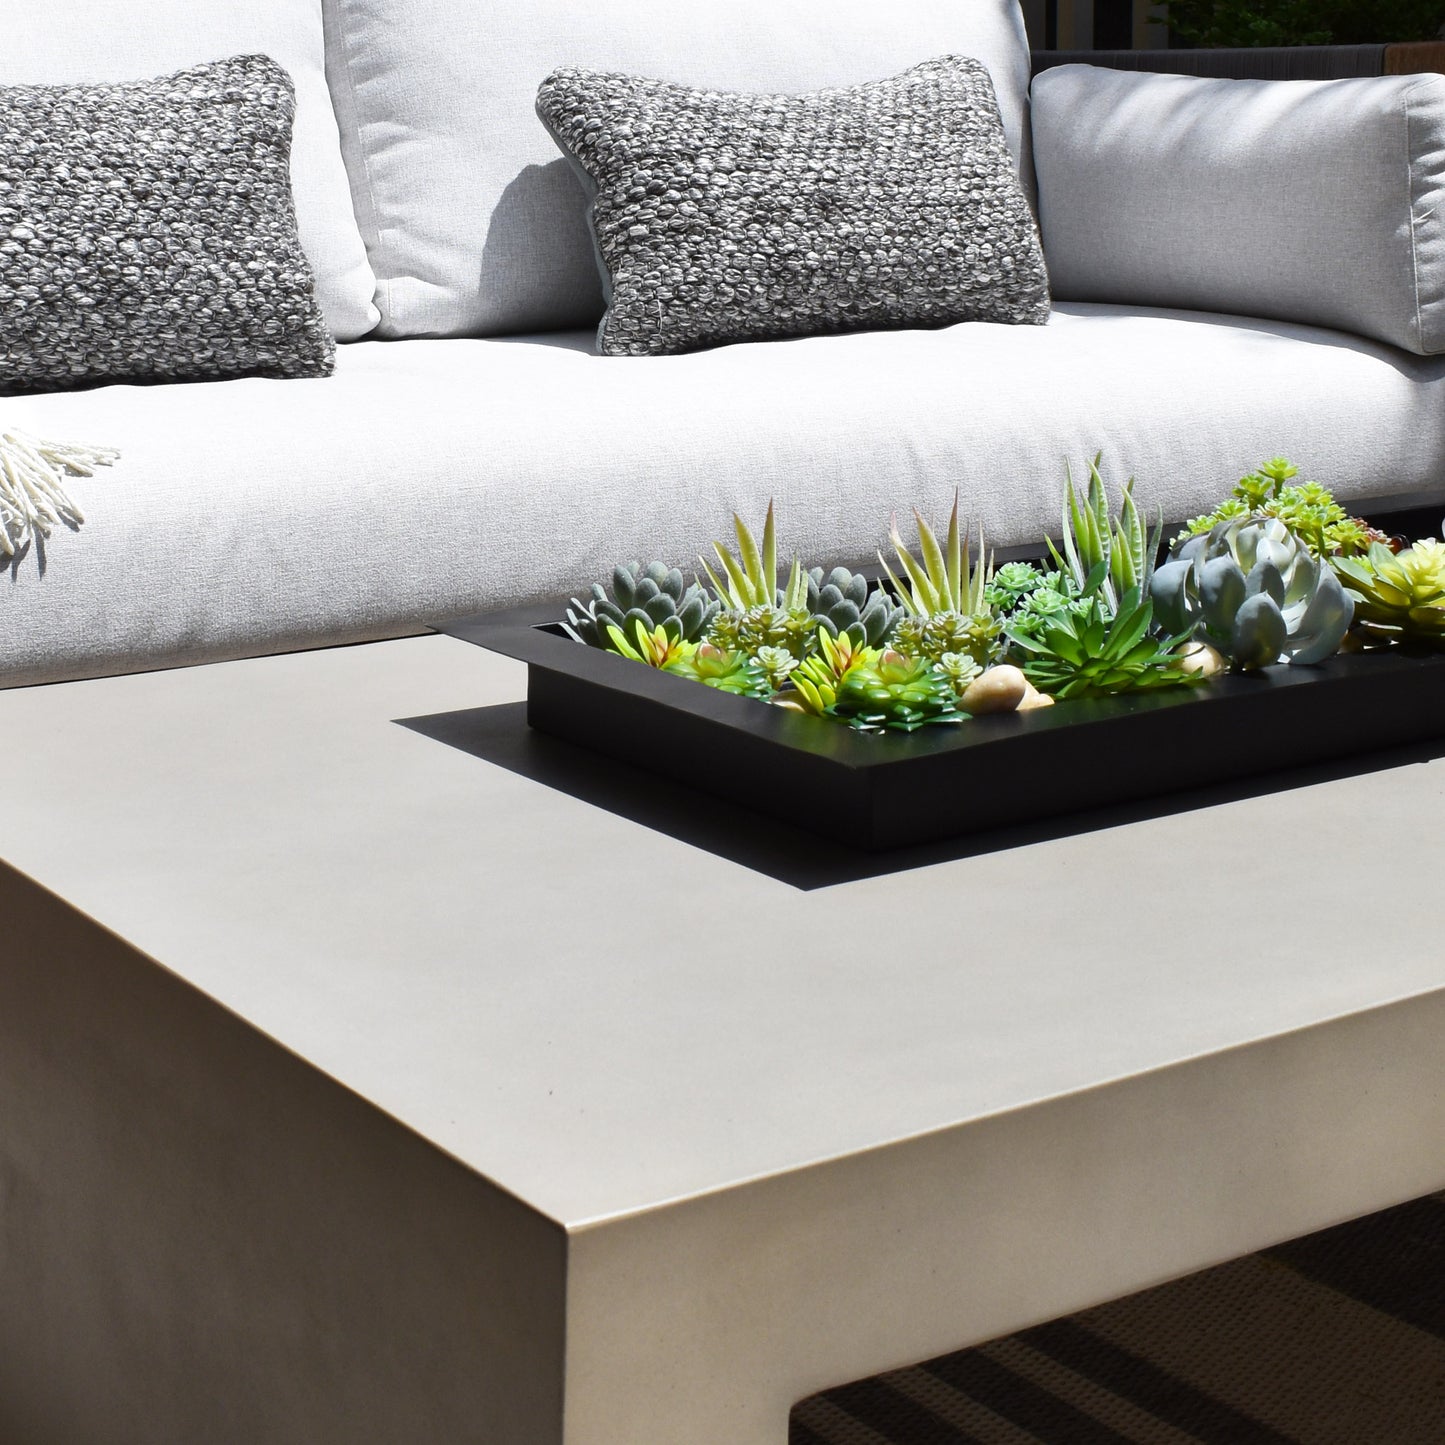 Black matte metal centerpiece tray filled with succulents on gray concrete table with light gray fabric outdoor sofa and dark gray large knot pillows.